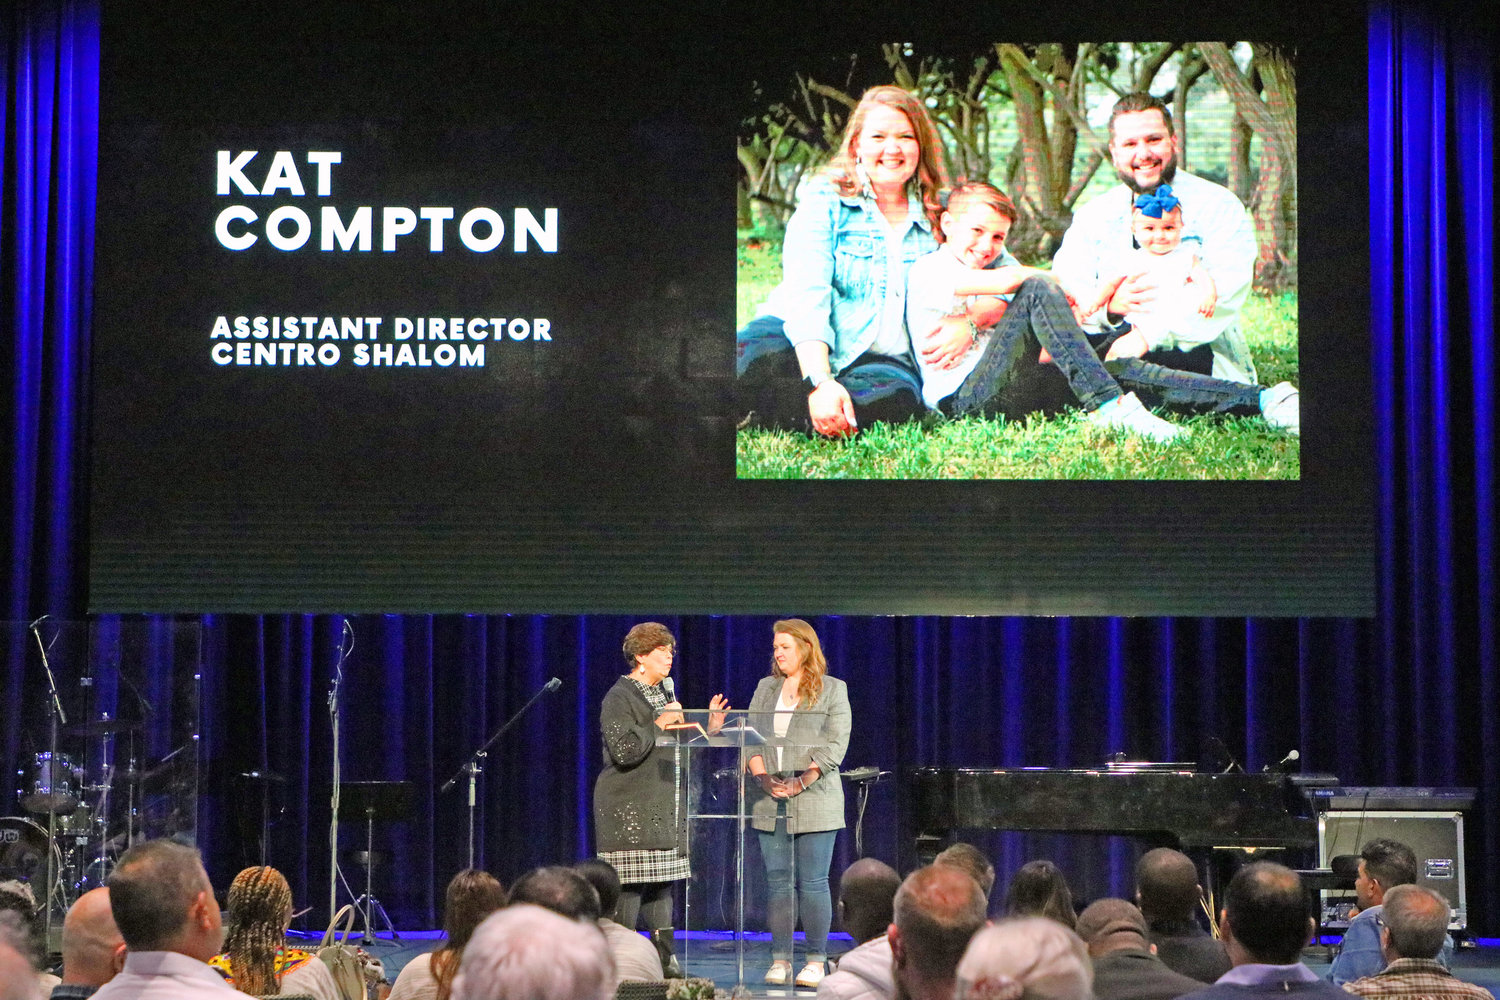 Kat Compton, Centro Shalom, shared loving and inspiring report from her and her husband’s ministry among the poor children and families in Mexico City.  It was one of the highlights during the San Diego Southern Baptist Association 80th Anniversary on Saturday January 14, 2023, El Cajon, CA.